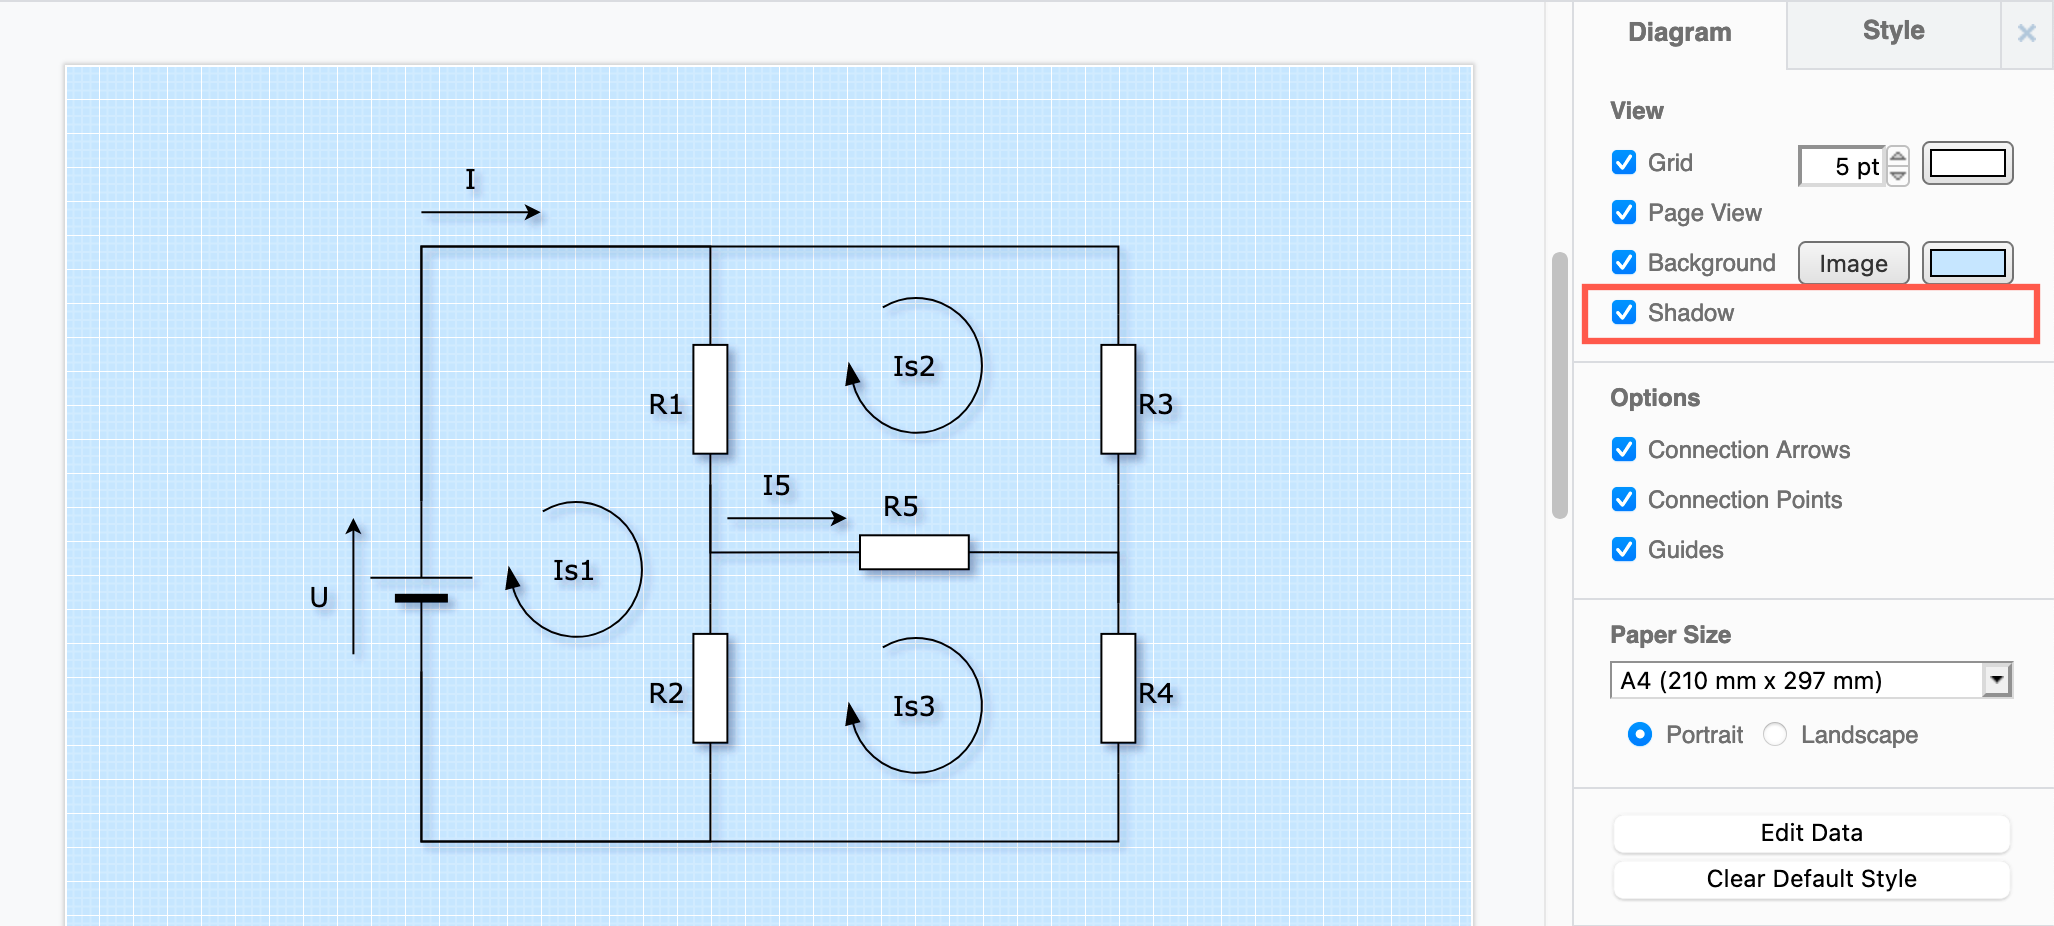 Add a shadow to all the shapes, connectors and text in your diagram